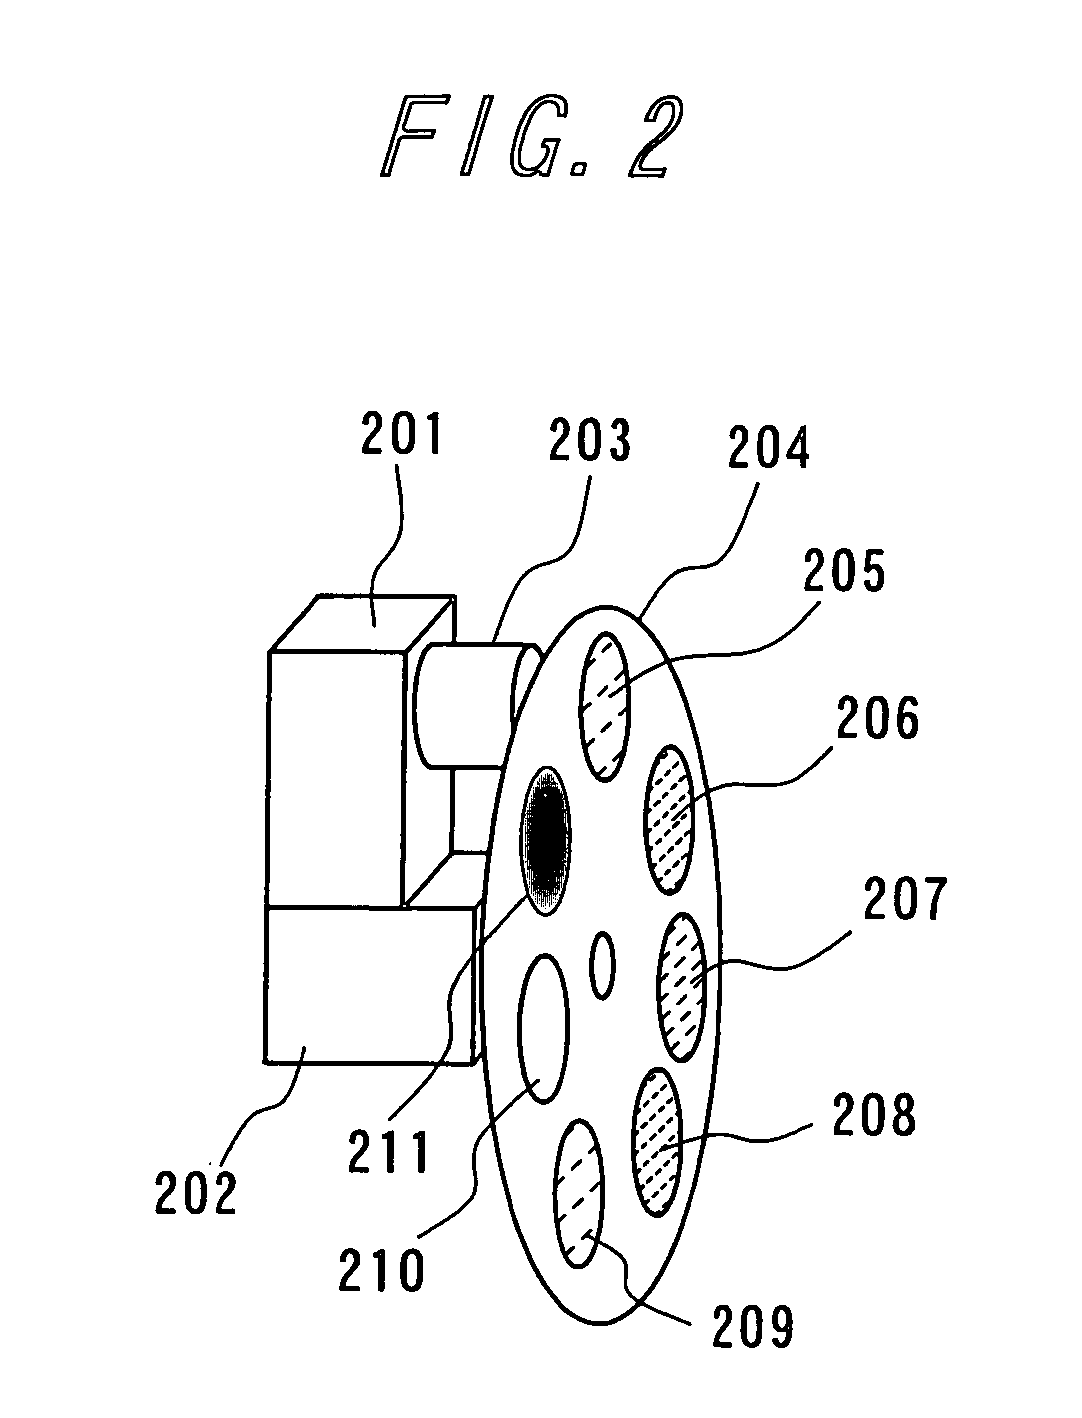 Displayed image capturing method and system